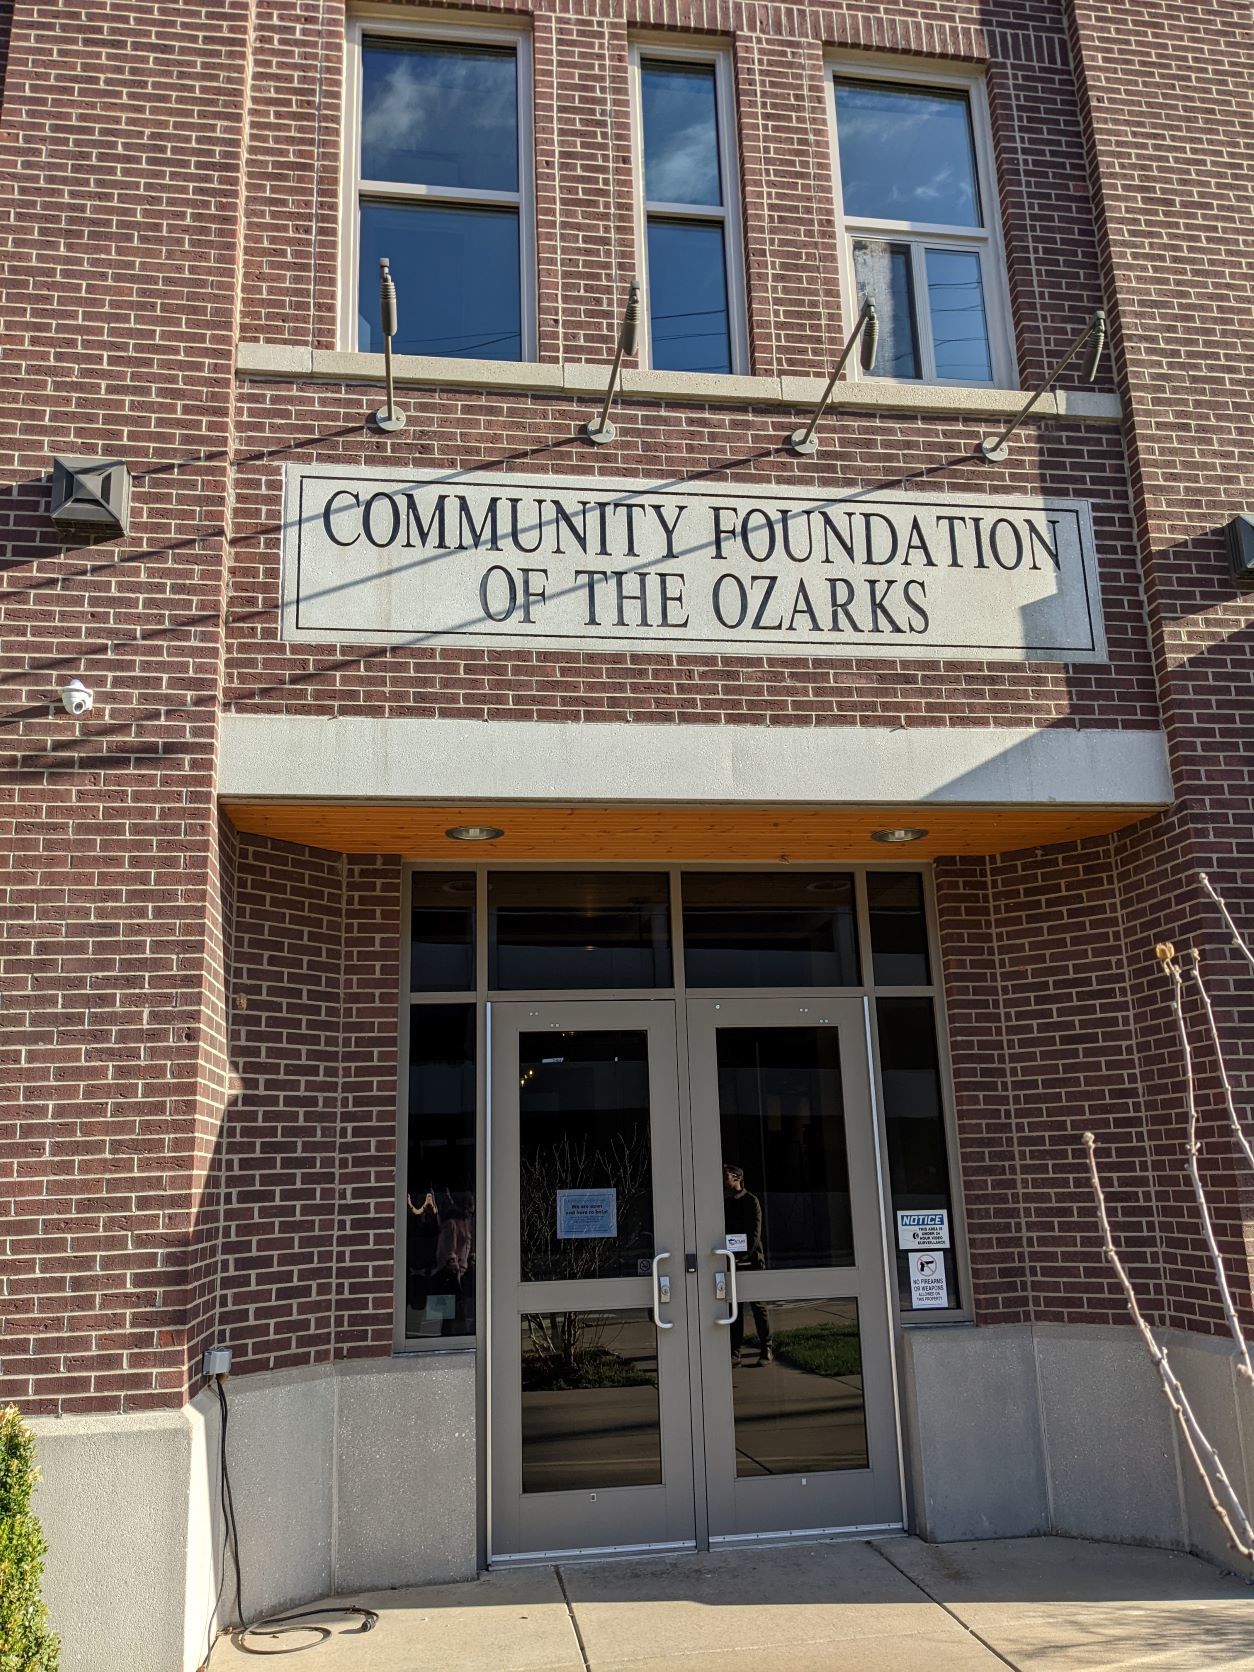 Entrance to the Community Foundation of the Ozarks